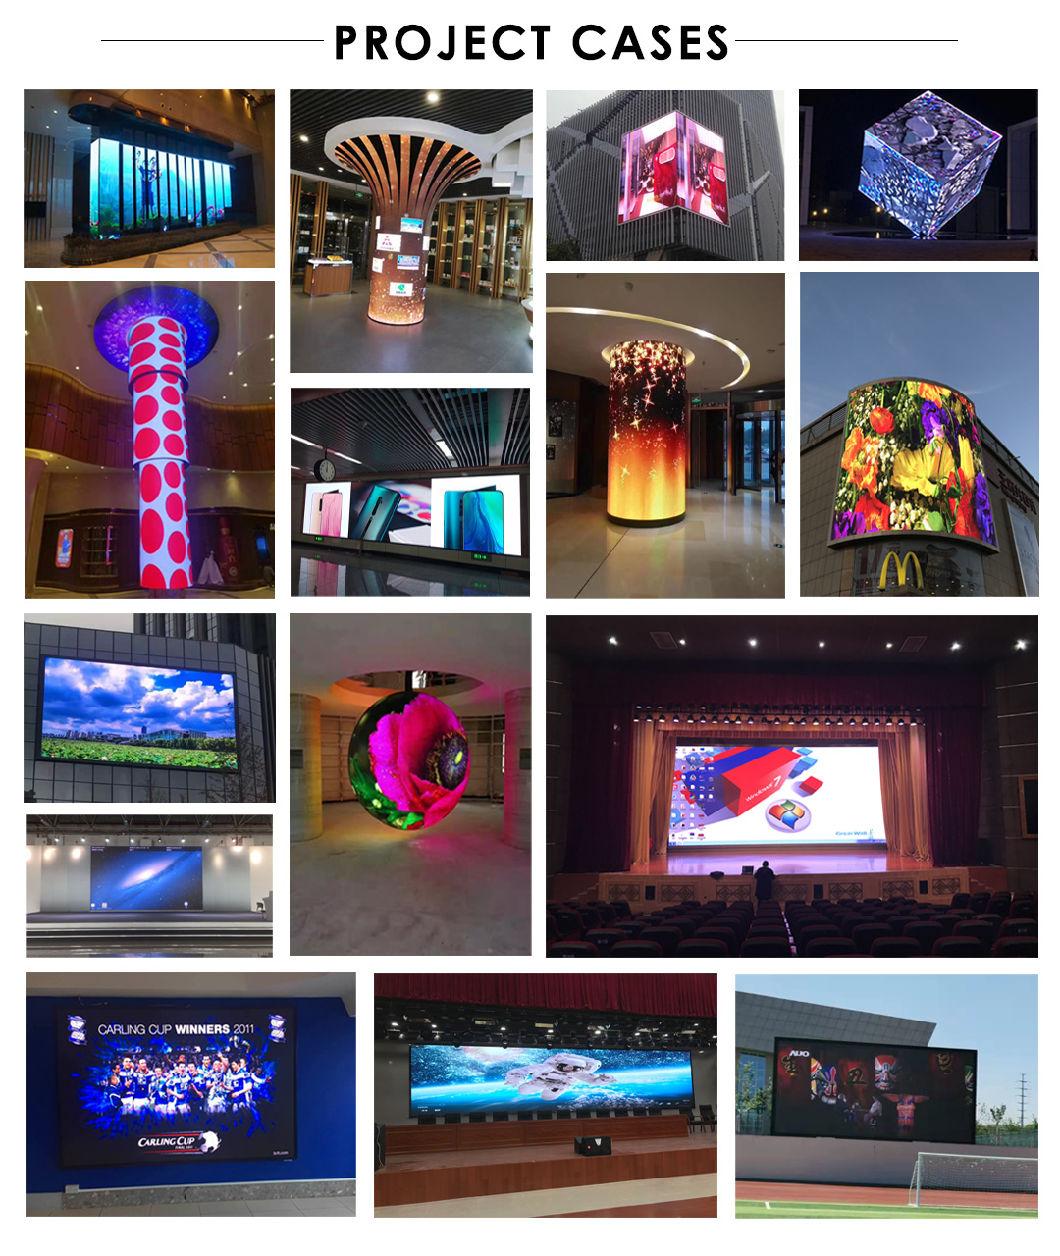 Light Weight Full Color LED Display Screen with Transparent LED Panel P3.91-7.81